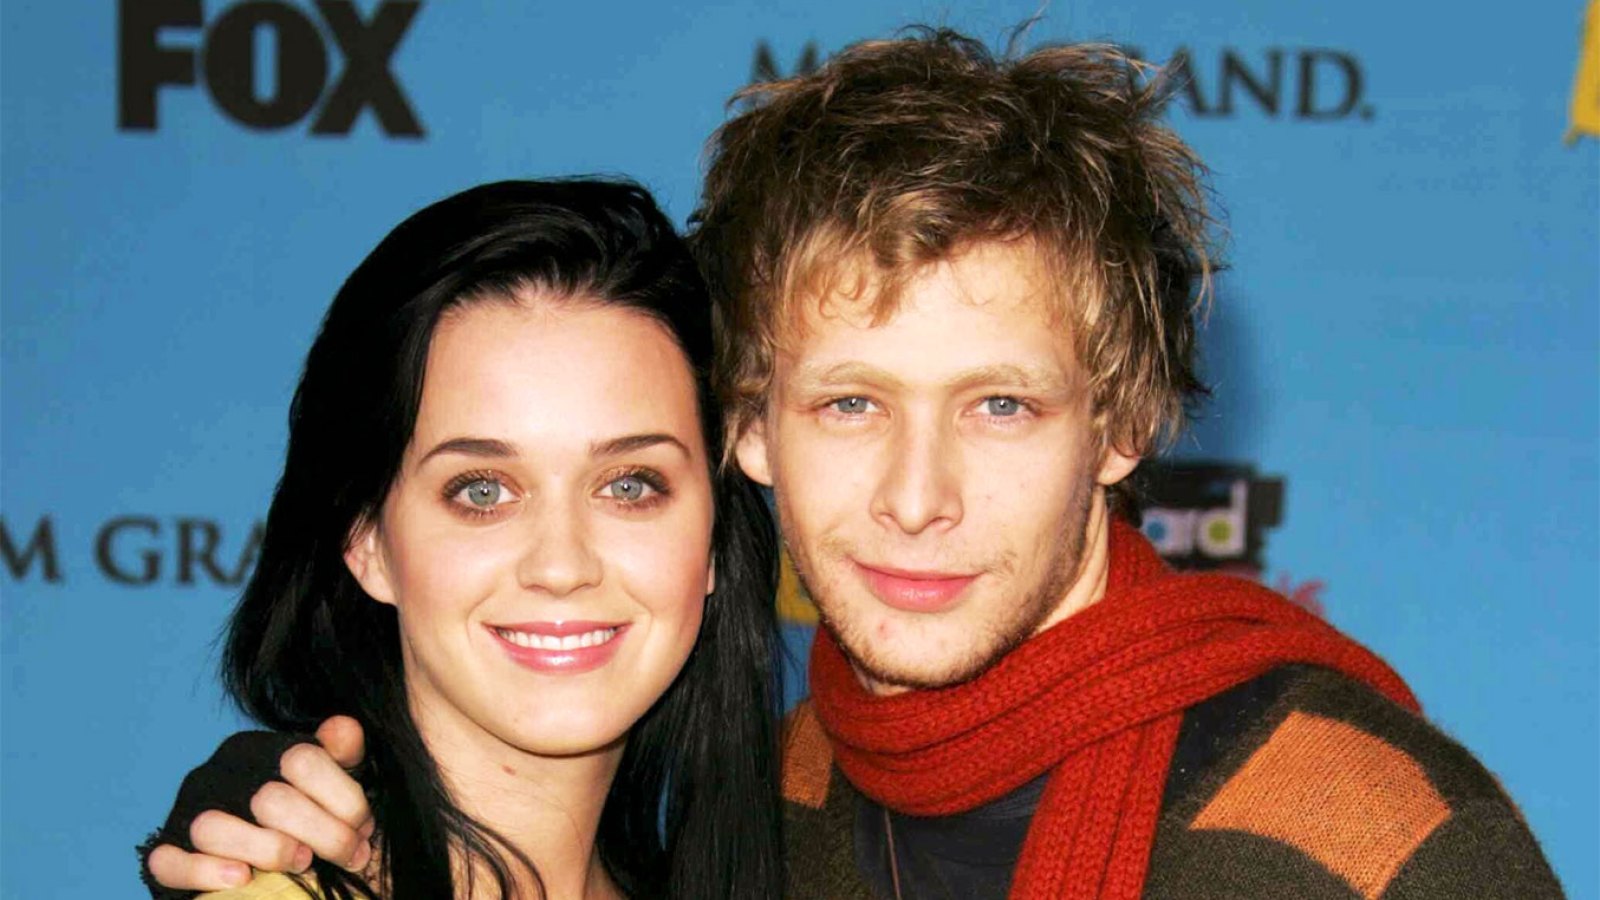 Katy-Perry-Devastated-Over-Johnny-Lewis-Death-Katy-Perry-Johnny-Lewis